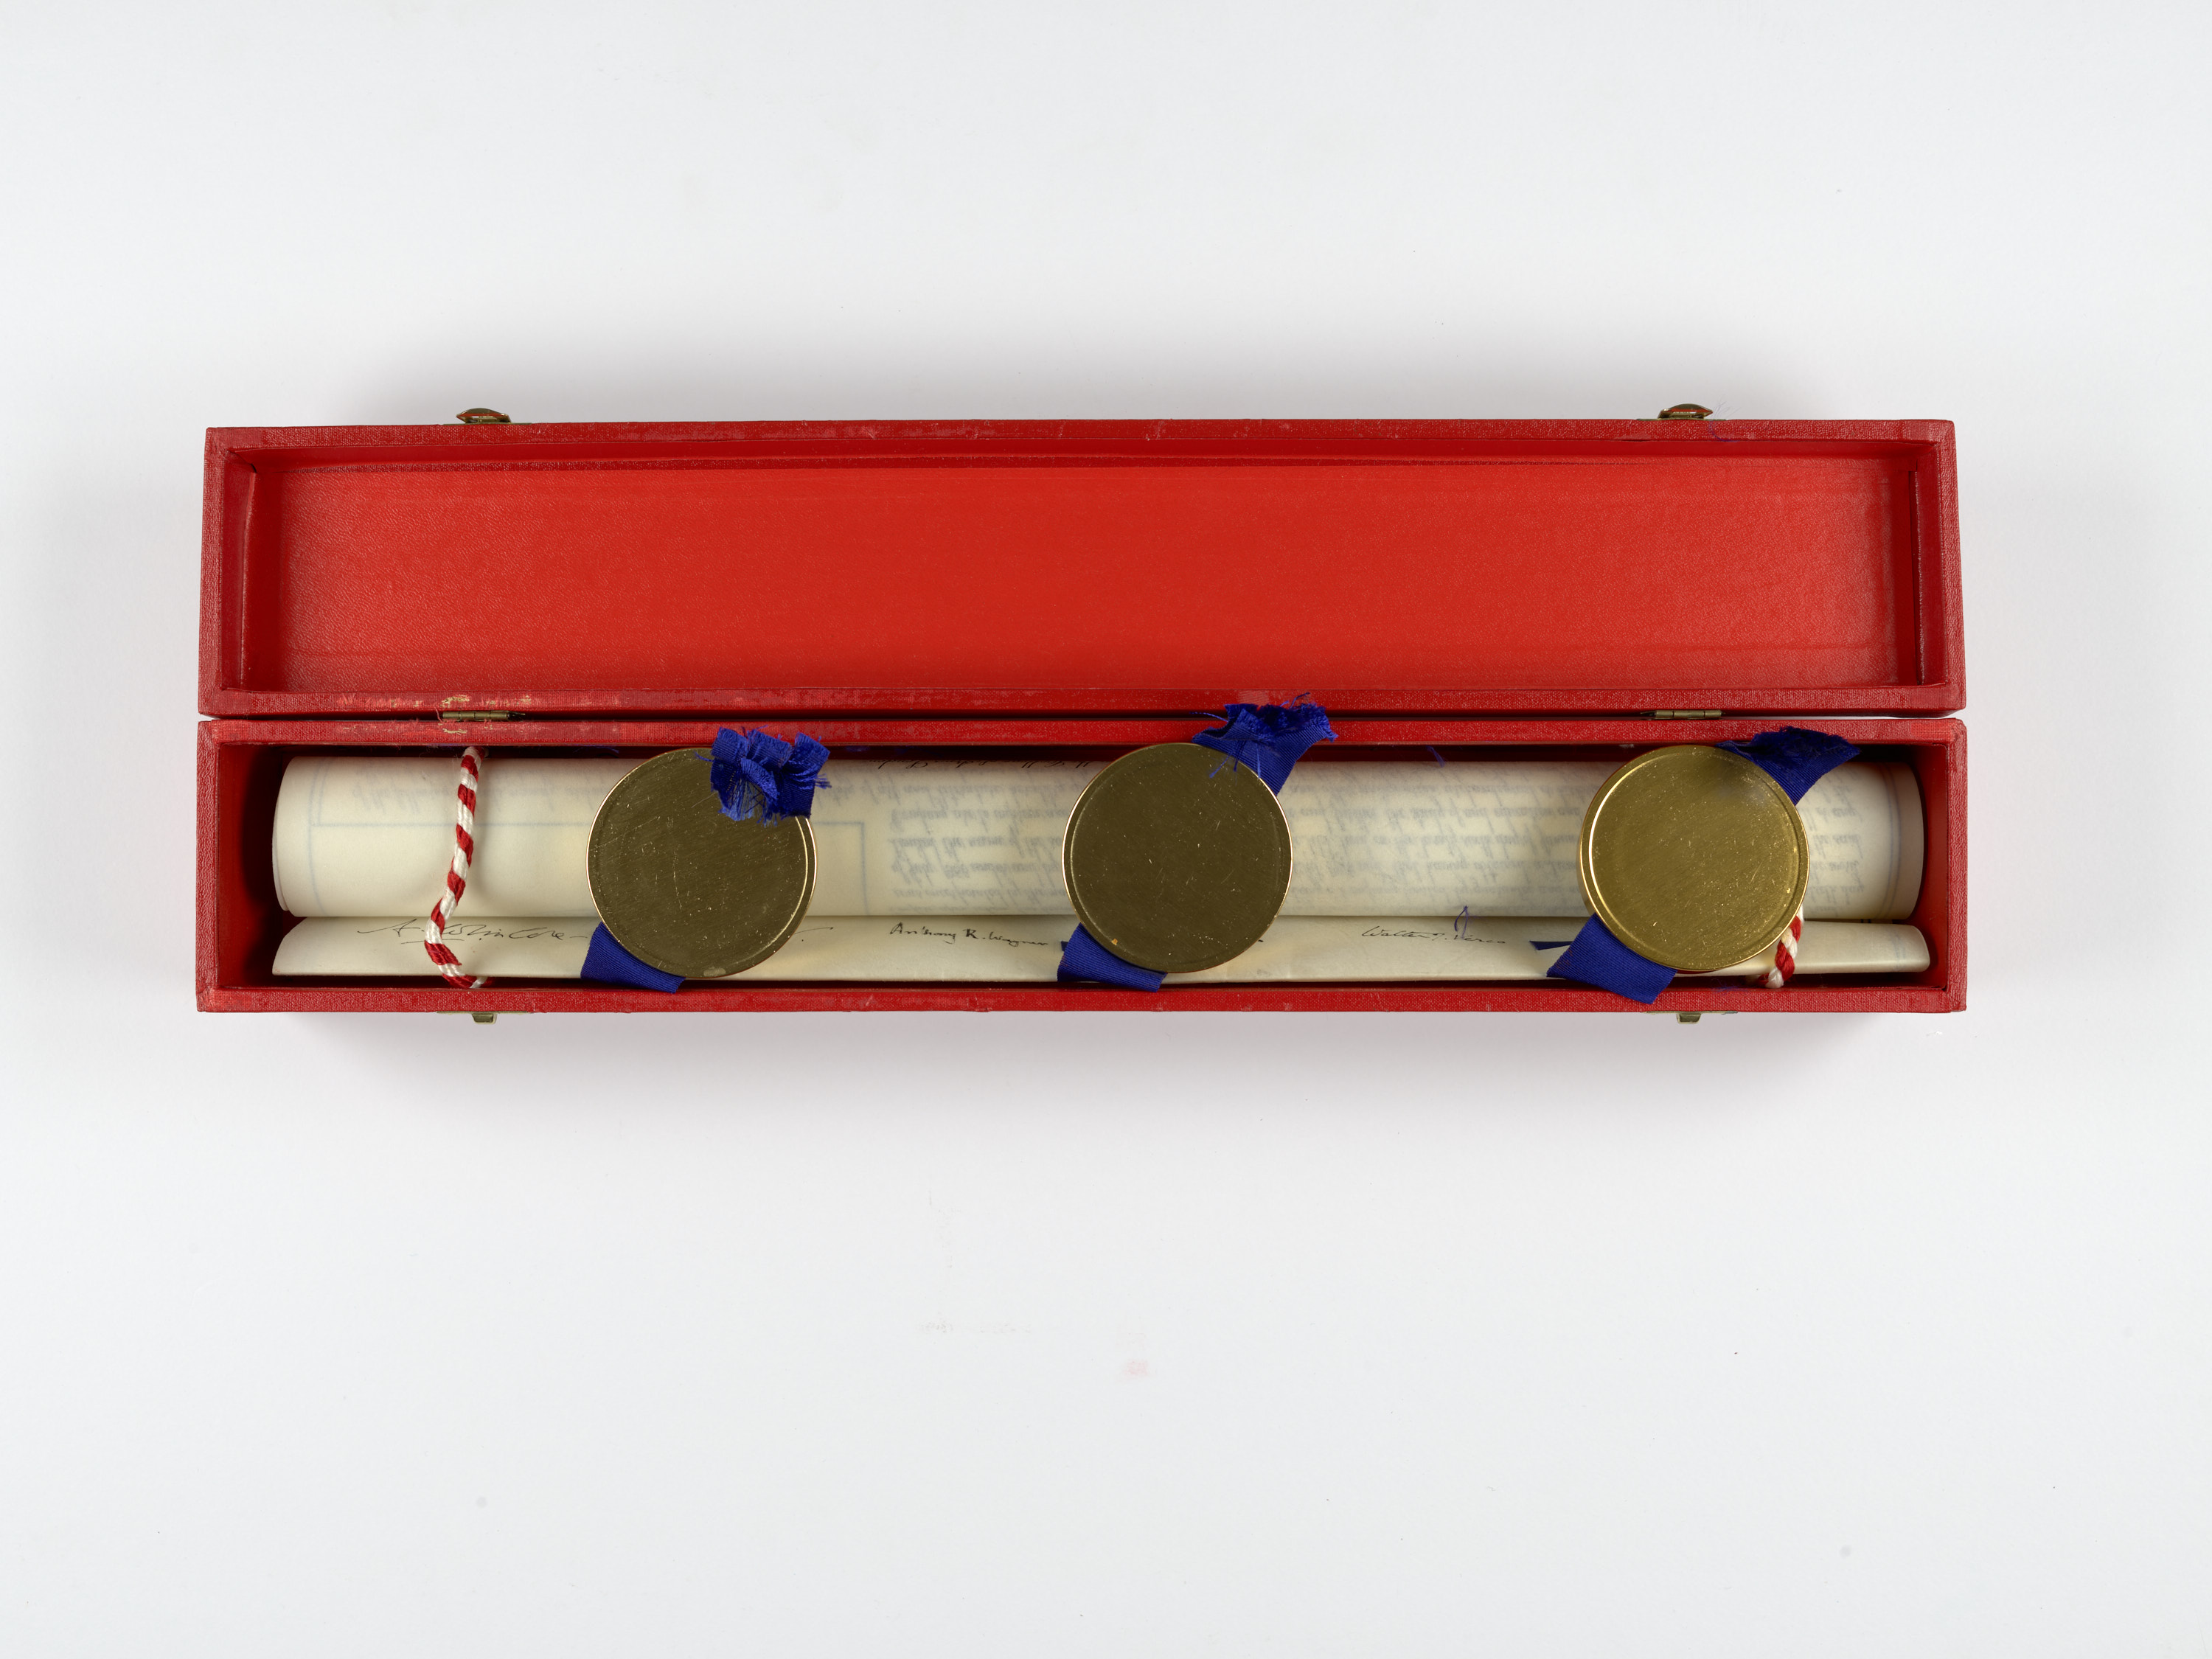 Rolled document - a coat of arms - in a red box with gold wax seals and blur ribbons